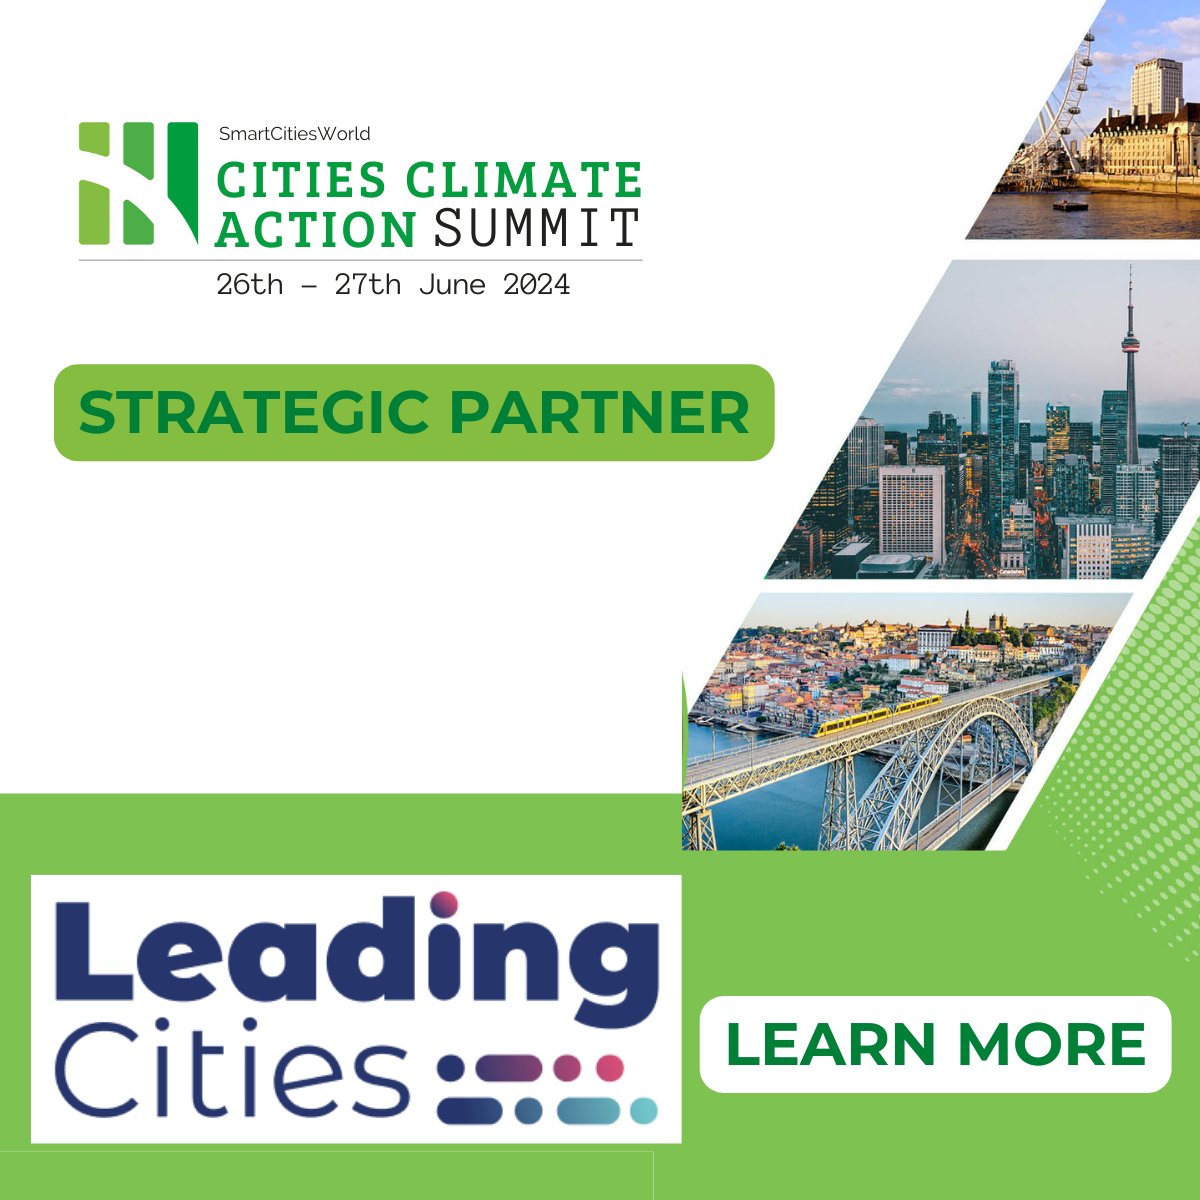 Excited to announce @leadingcities as a strategic partner for Cities Climate Action Summit - the only climate action event dedicated to addressing climate issues facing the worlds cities. Partner with us smartcitiesworld.net/get-involved #CCAS2024 #leadingcities